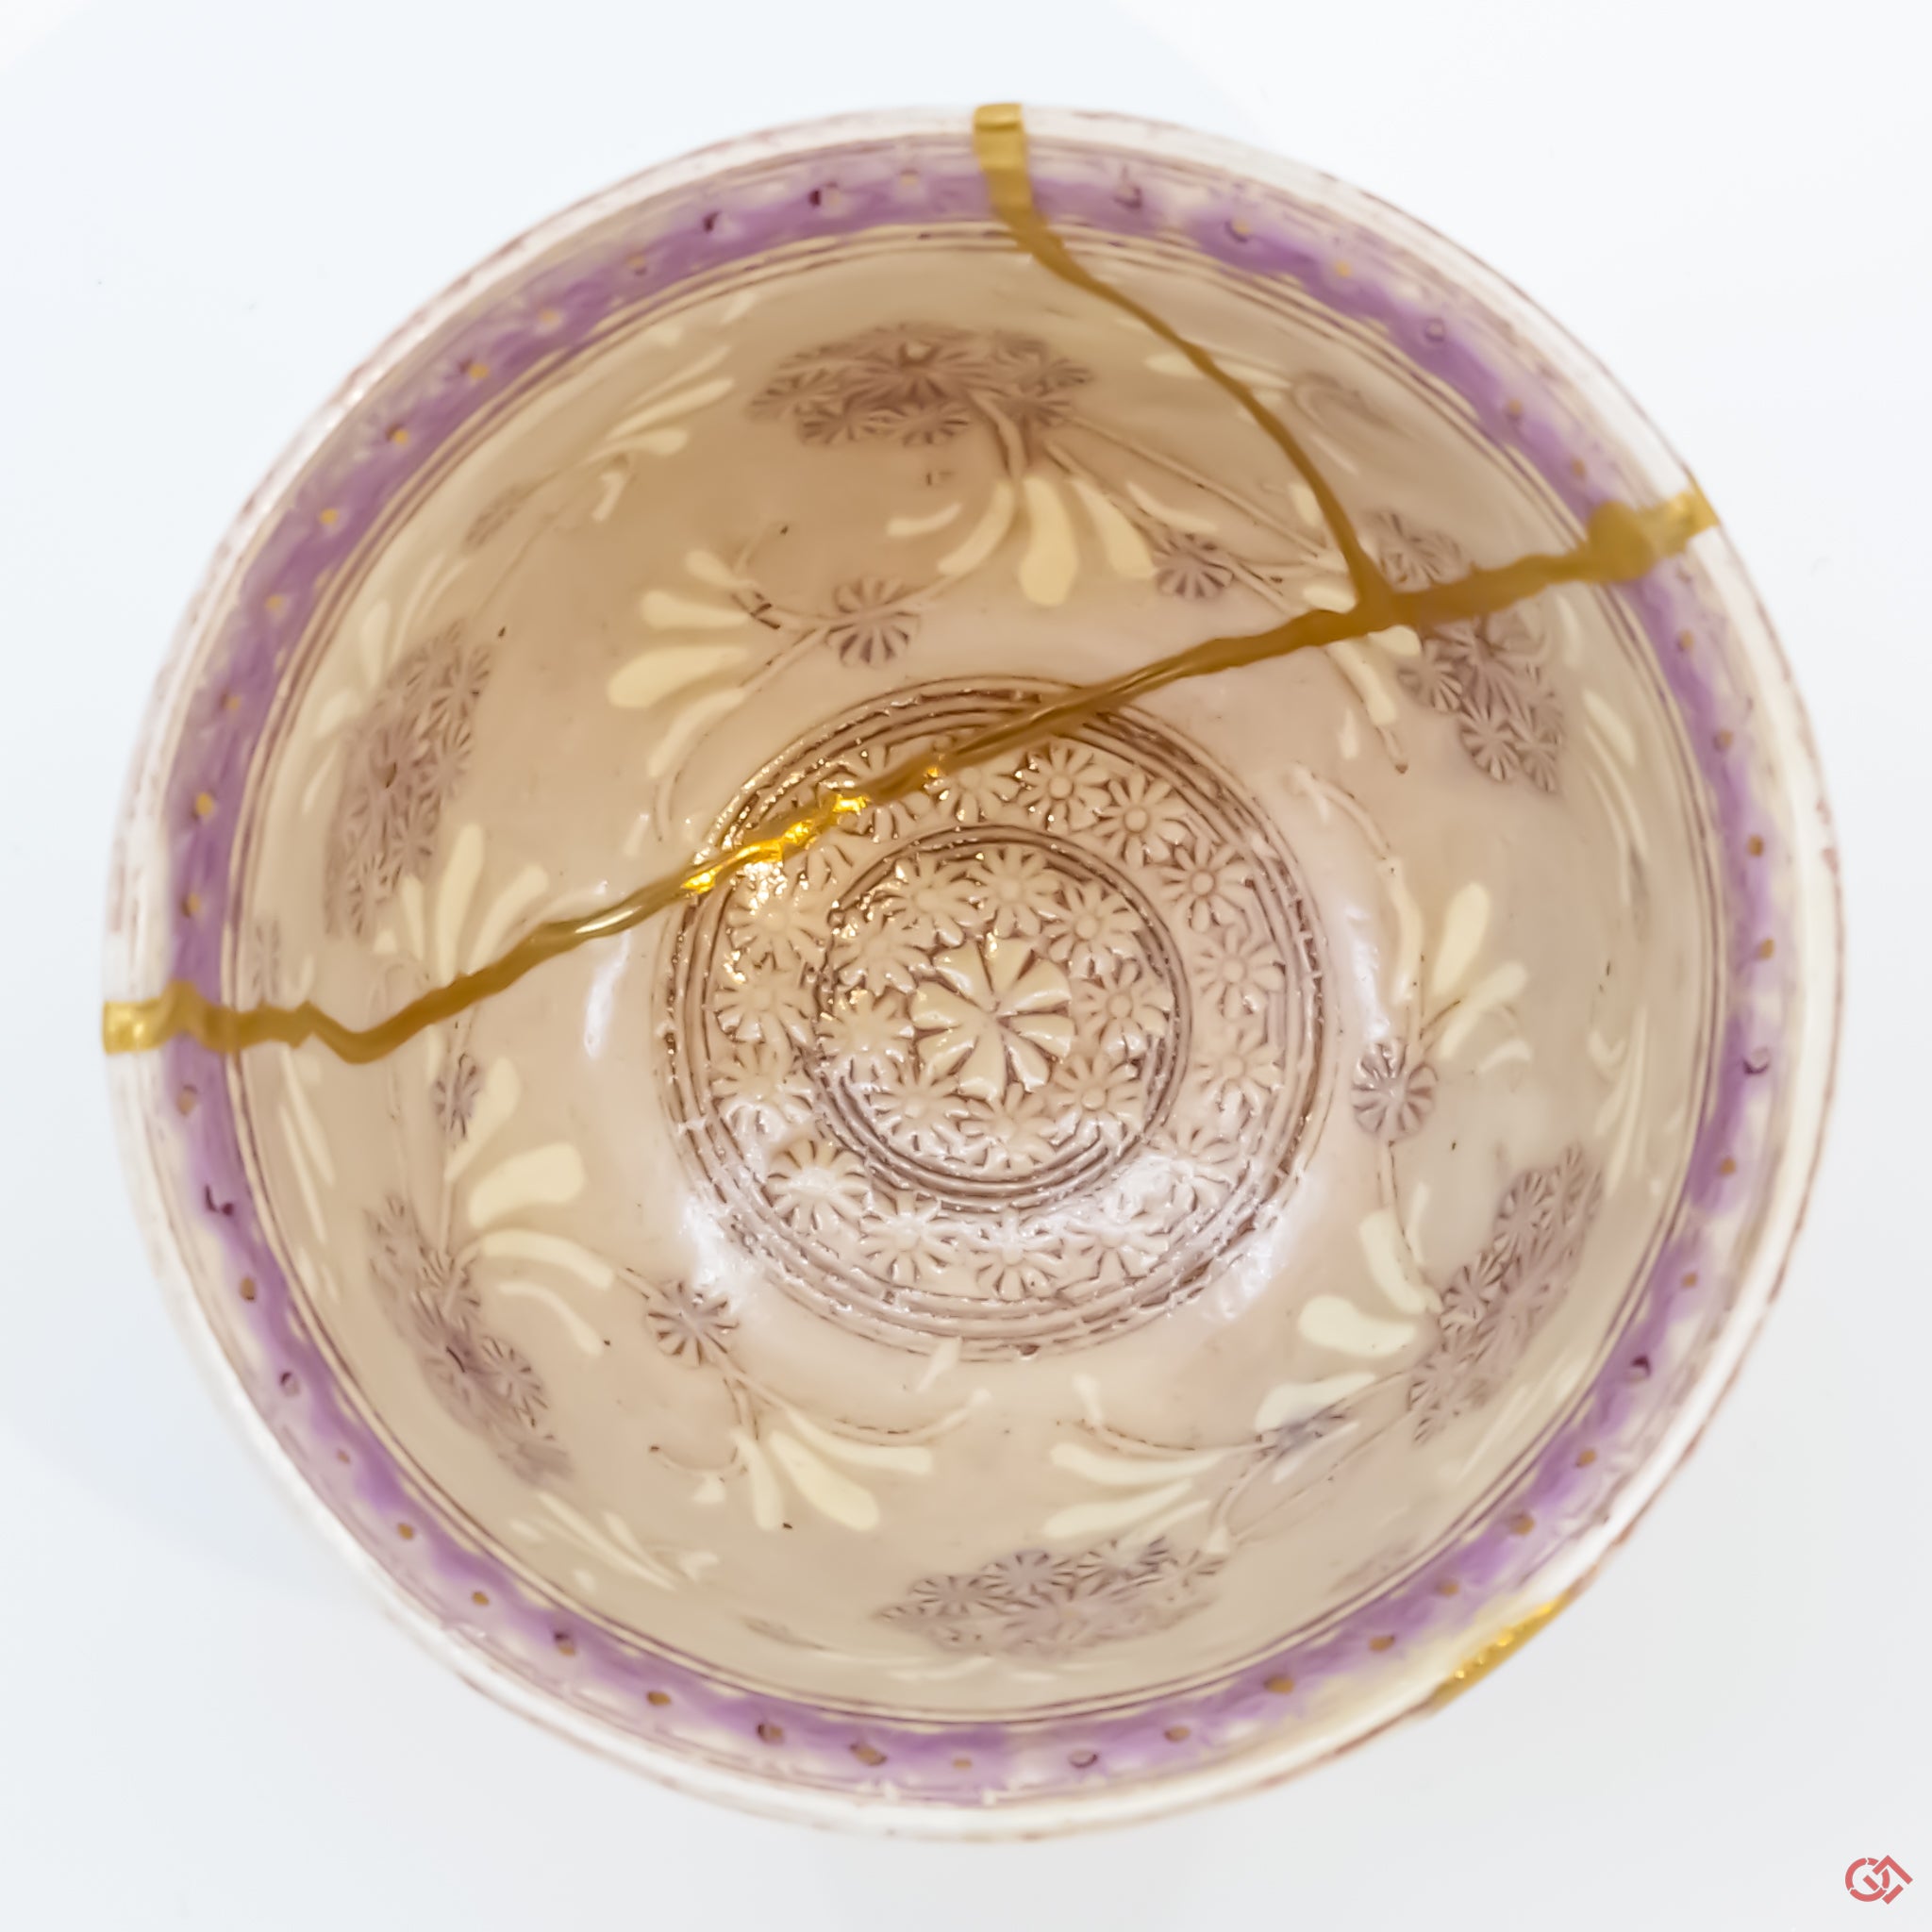 Photo of the top side of an authentic Kintsugi pottery piece, showing its overall design and features